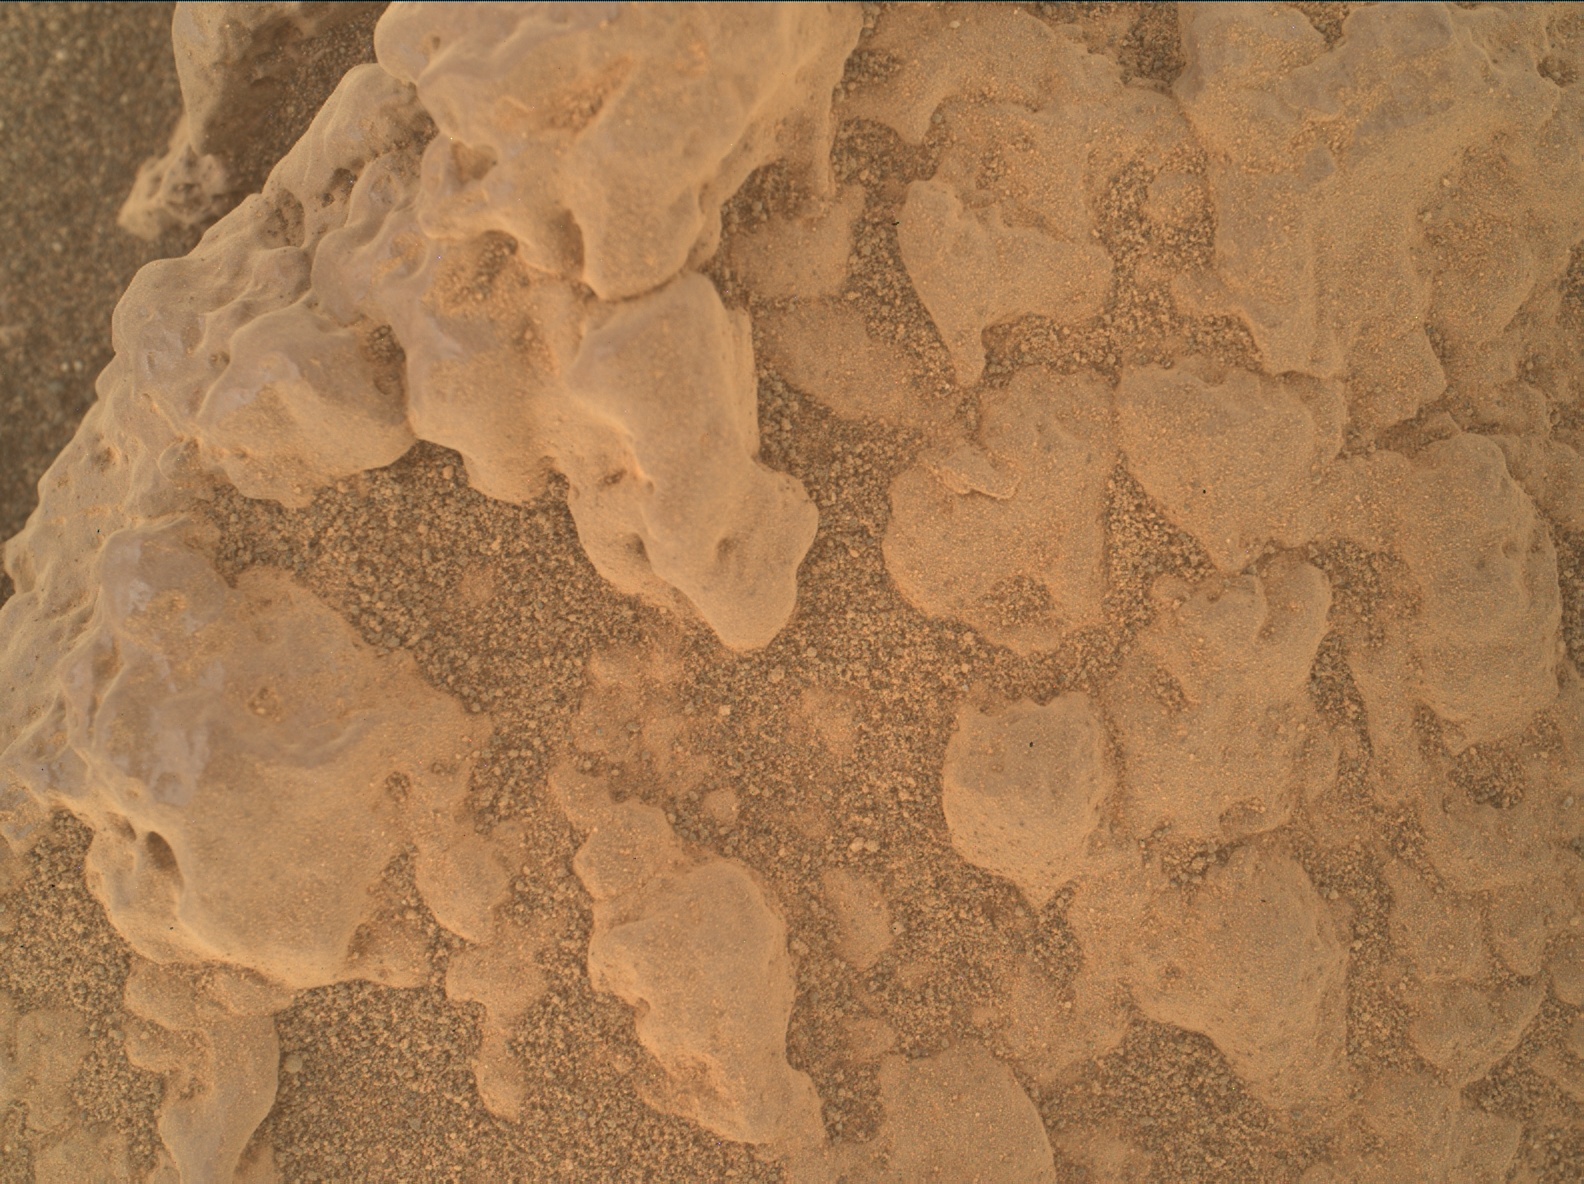 Nasa's Mars rover Curiosity acquired this image using its Mars Hand Lens Imager (MAHLI) on Sol 2563